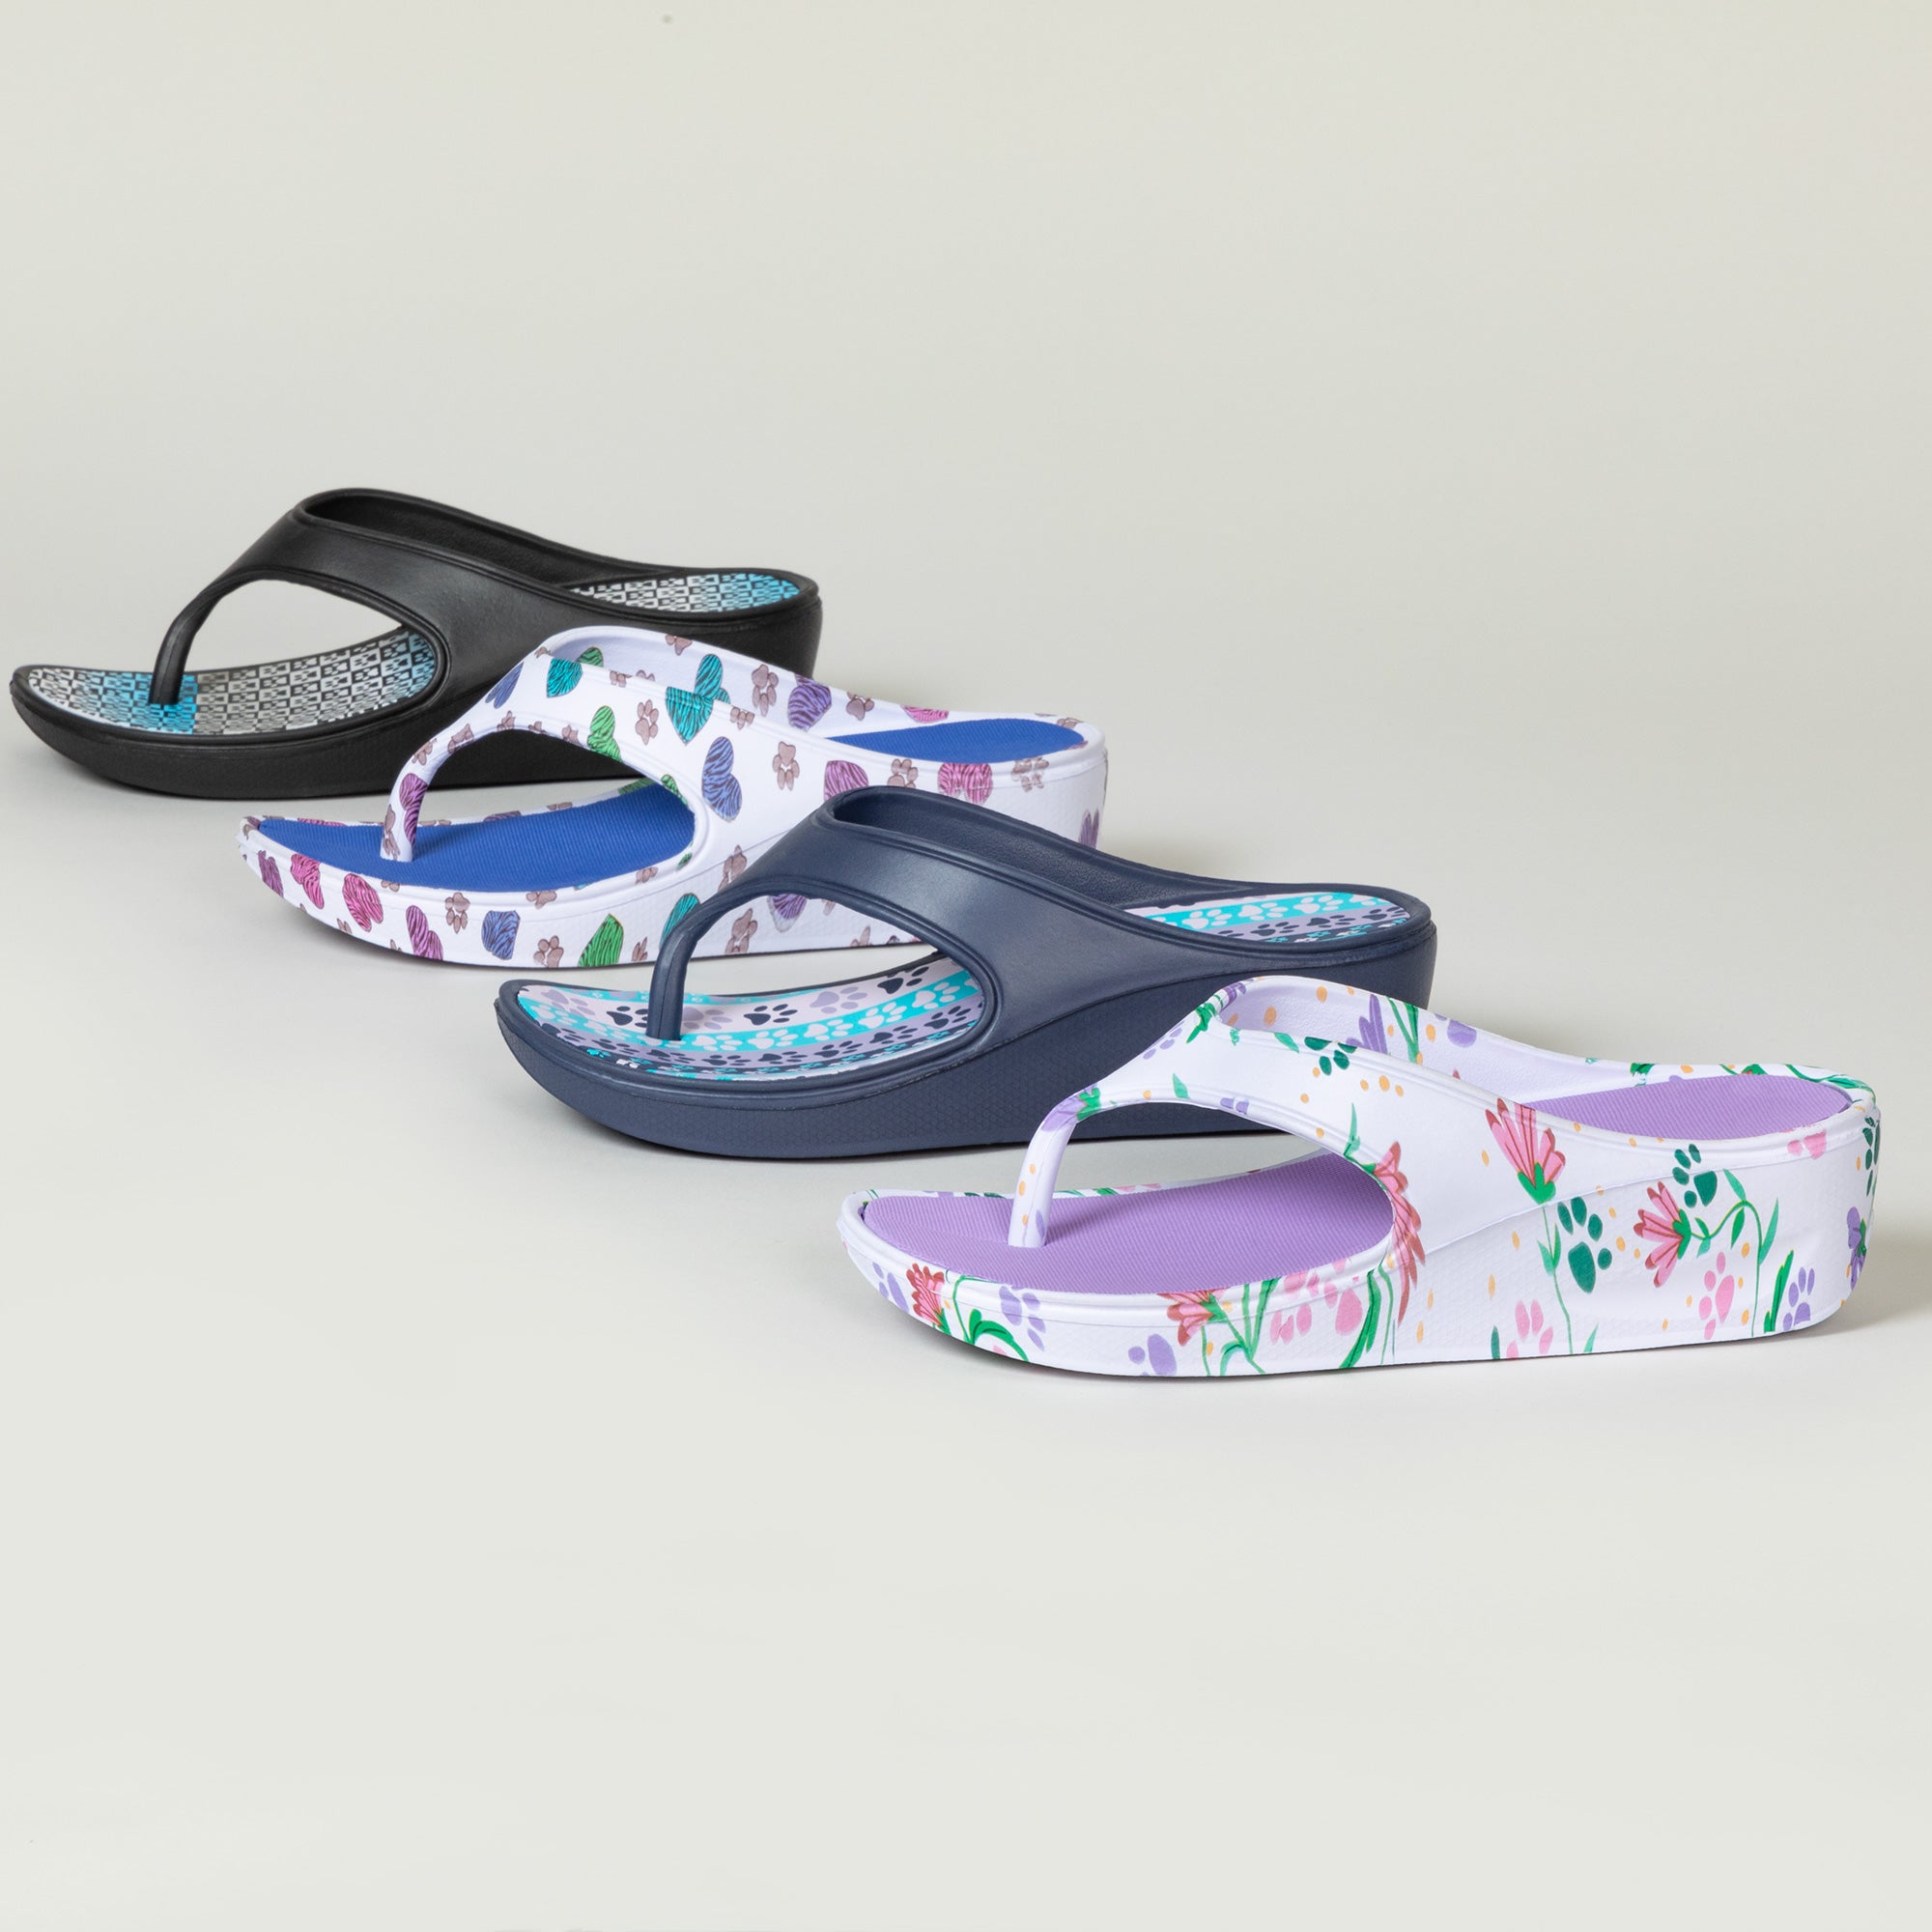 Paw Print Wedge Flip Flops - Paws & Hearts - 6